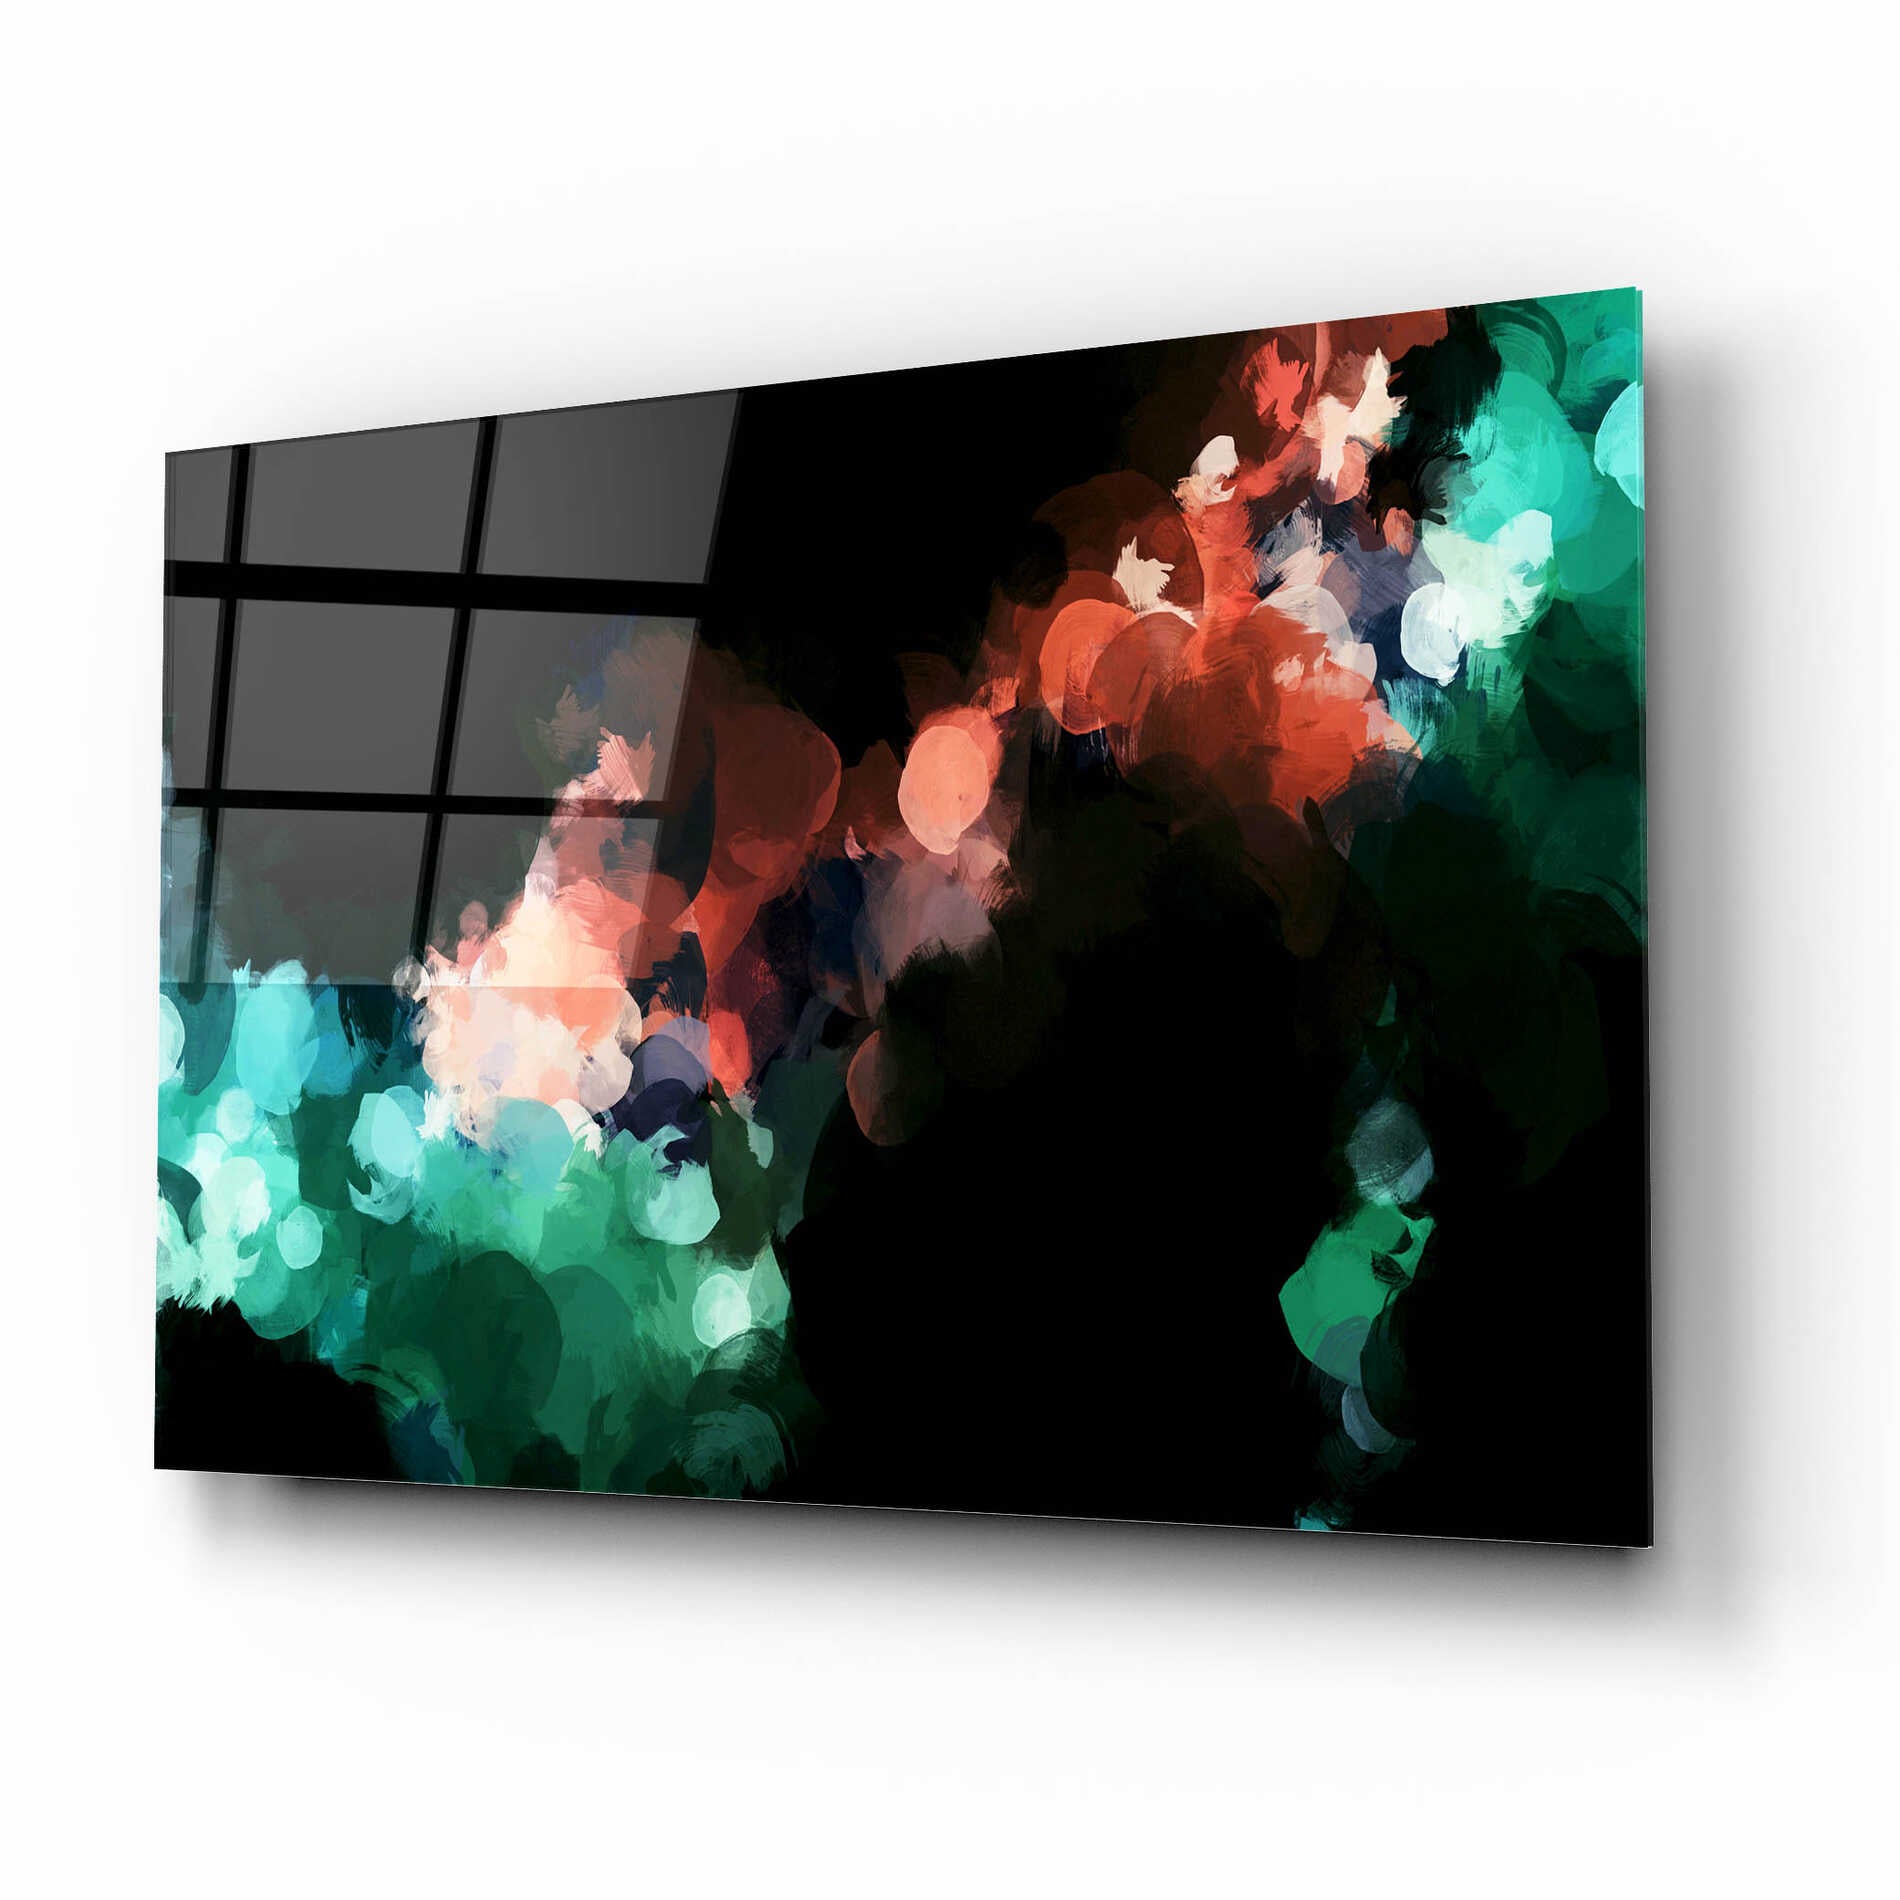 Epic Art 'Inverted Abstract Colorful Flows 17' by Irena Orlov Acrylic Glass Wall Art,16x12